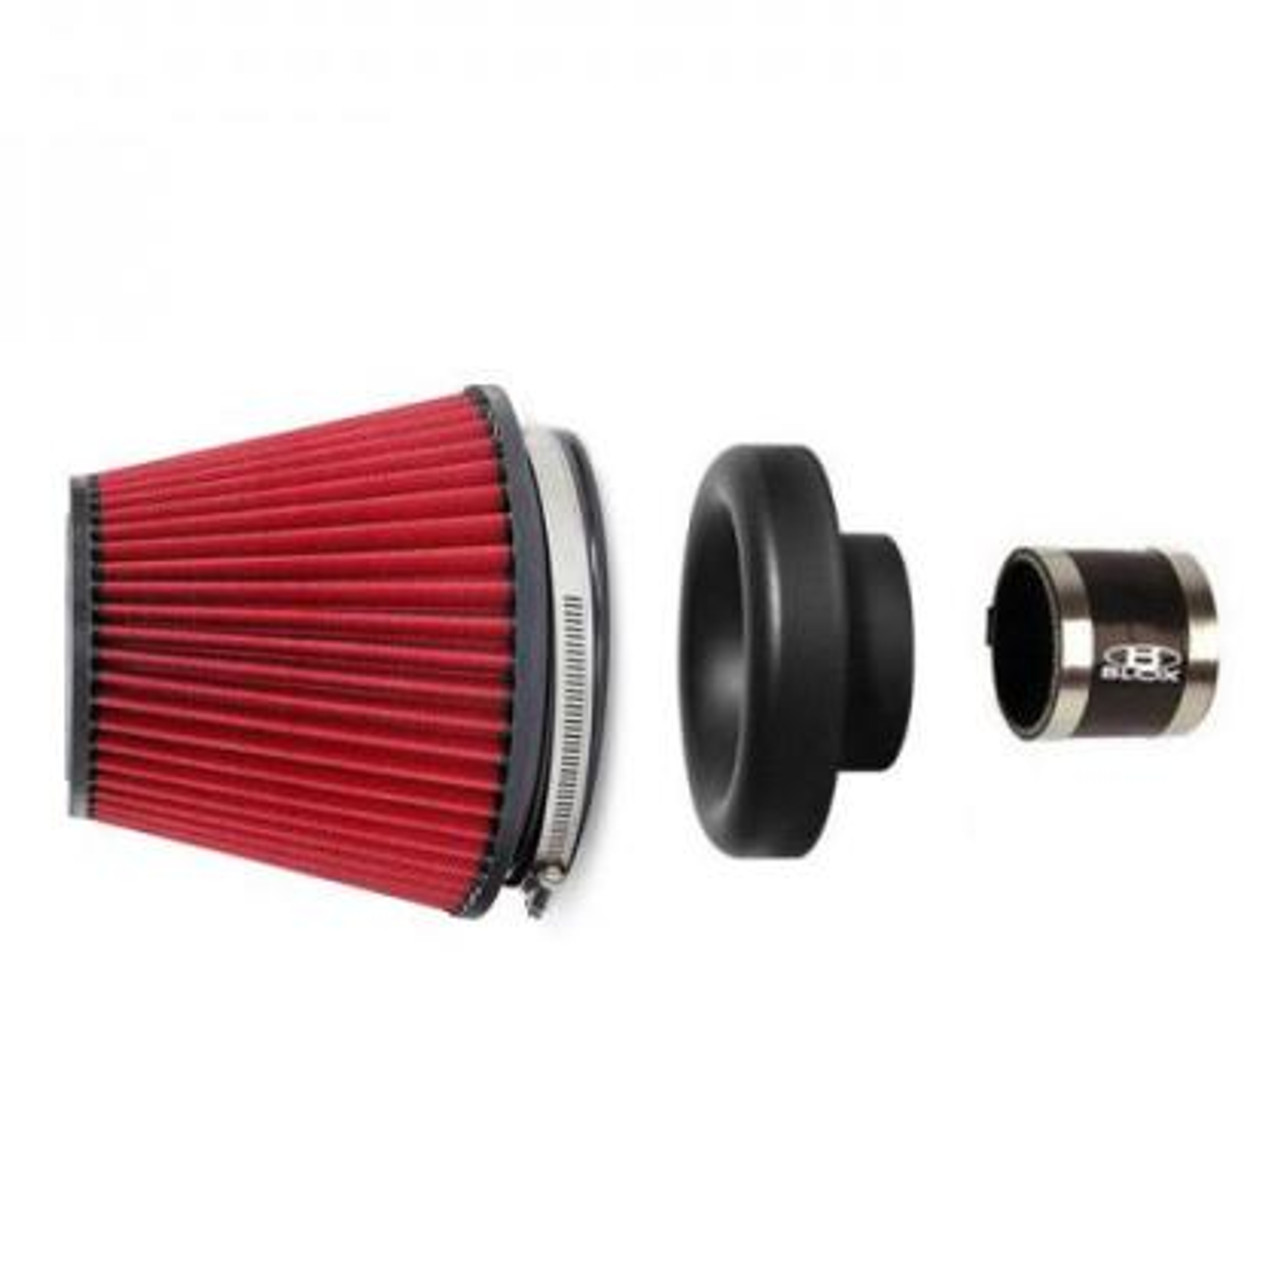 Performance Filter Kit; Includes Composite Velocity Stack, Filter & Silicone Hose Kit